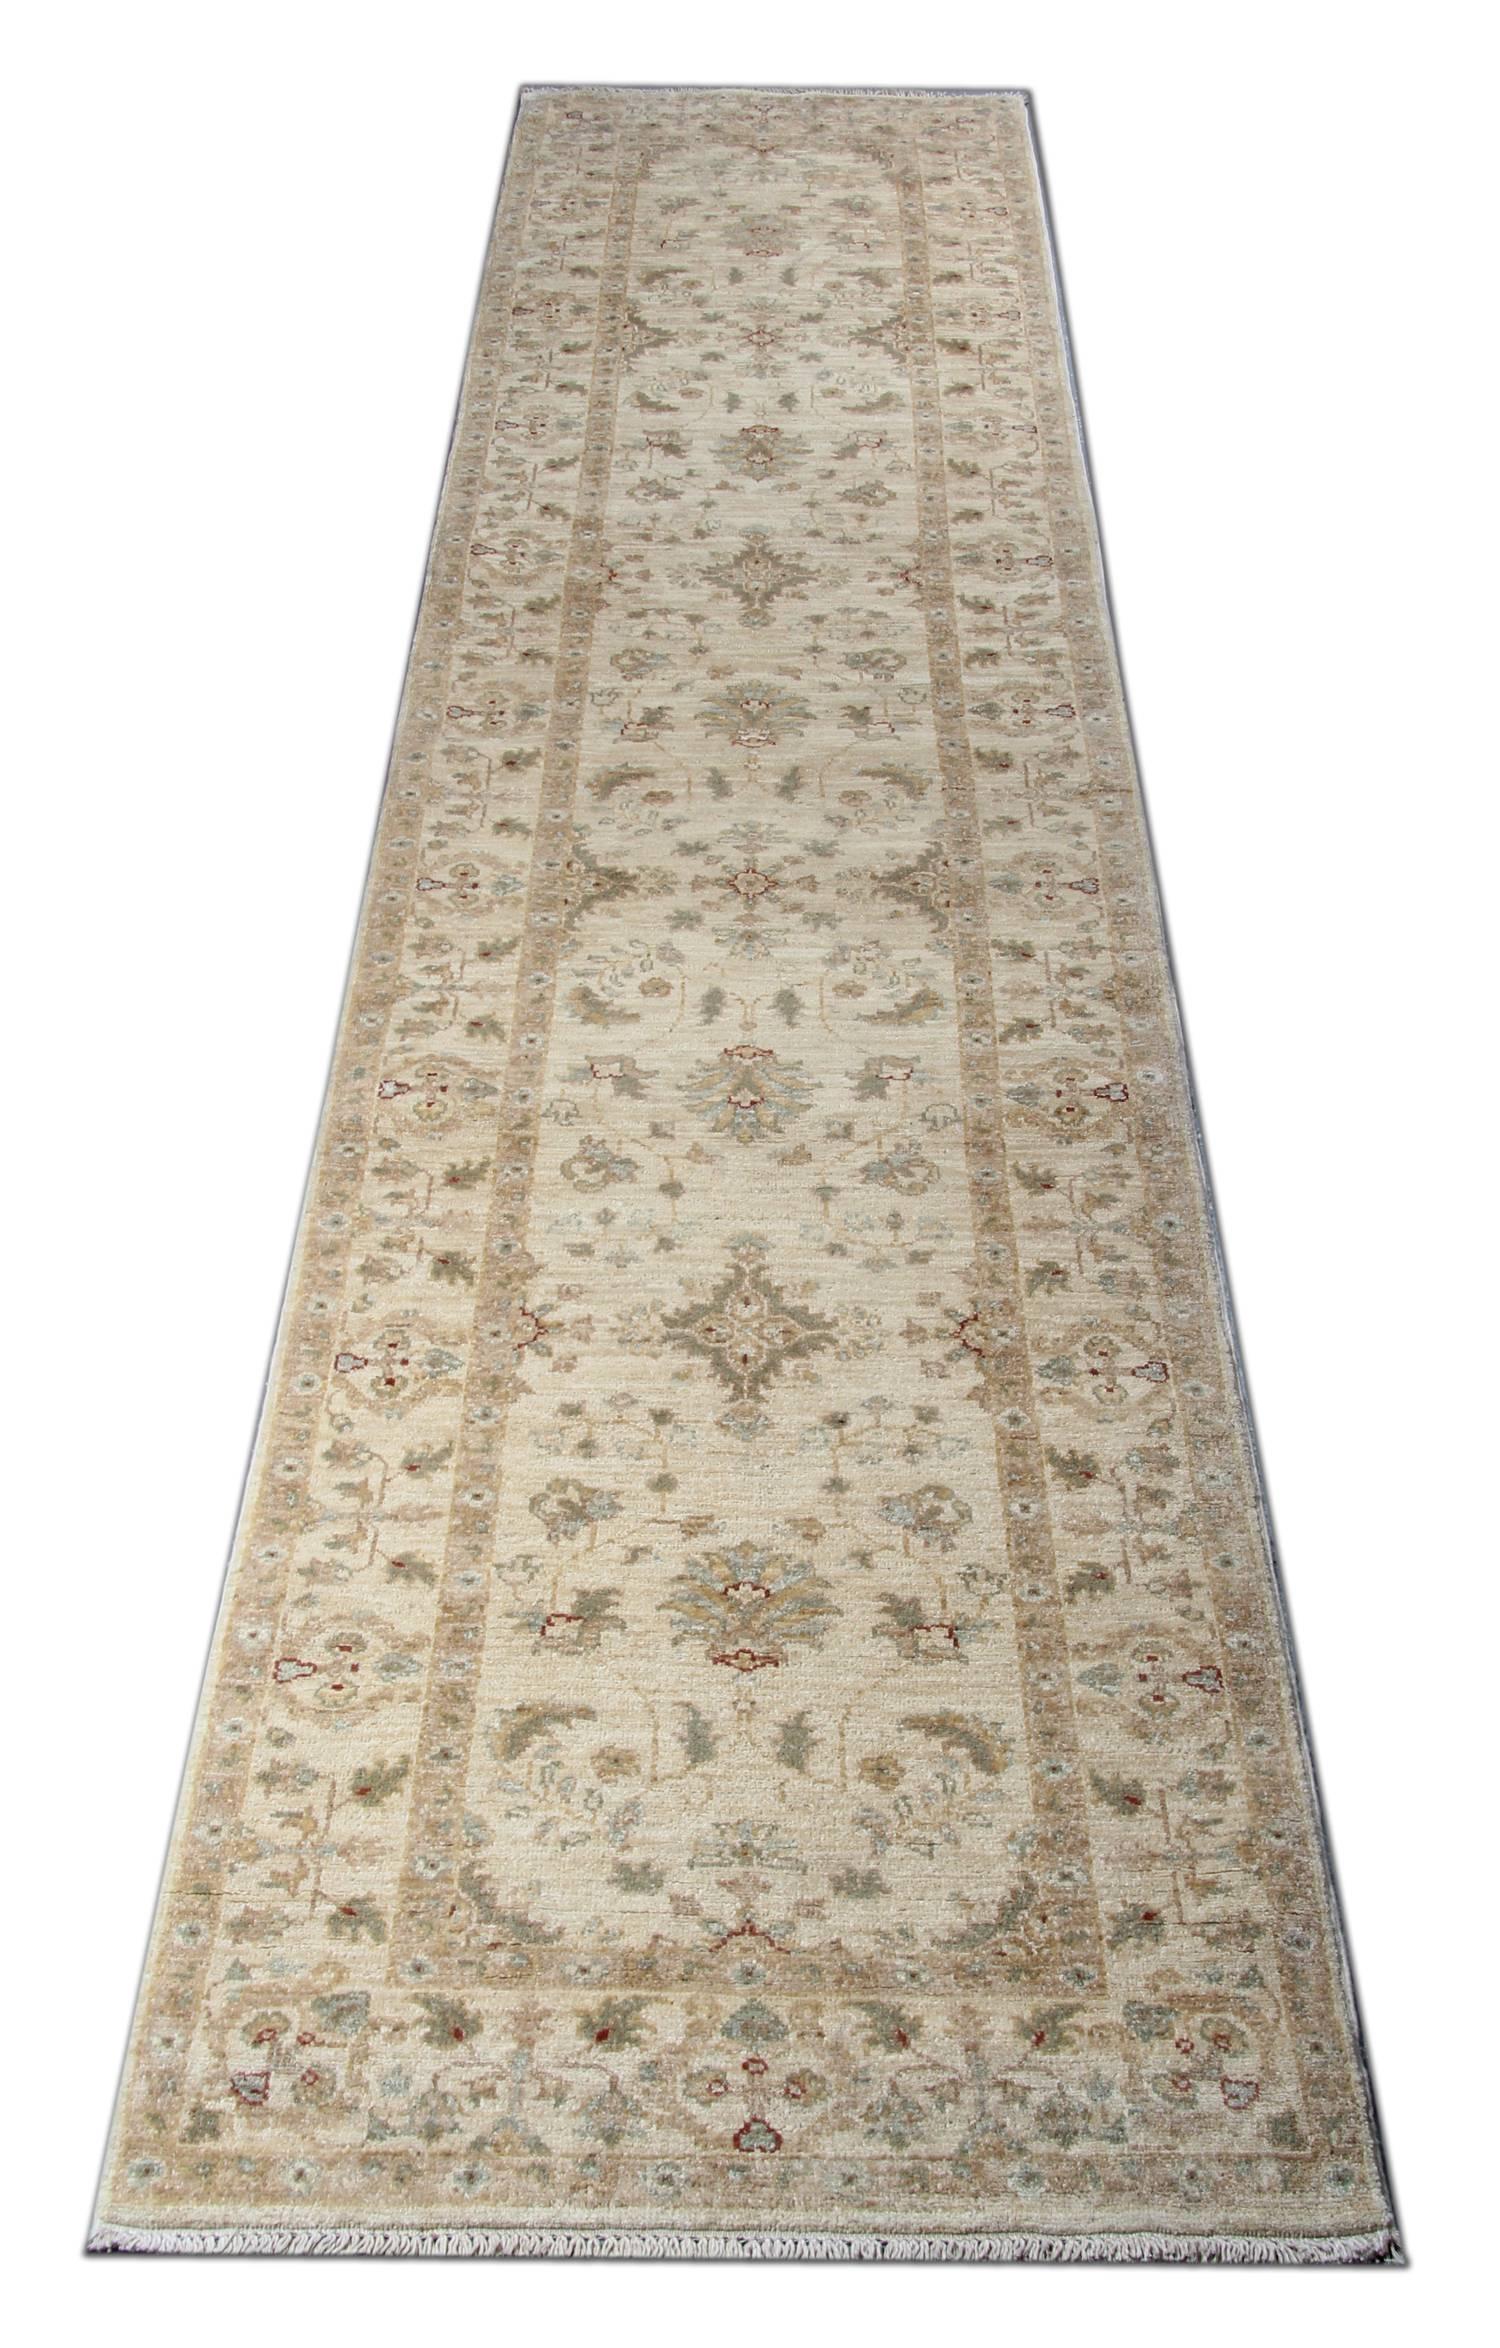 This oriental rug runners, Ziegler Sultanabad style traditional rugs runner made on our own looms by our master weavers in Afghanistan, these handmade carpet runners are made with all-natural vegetable dyes all handspun wool. The large-scale design